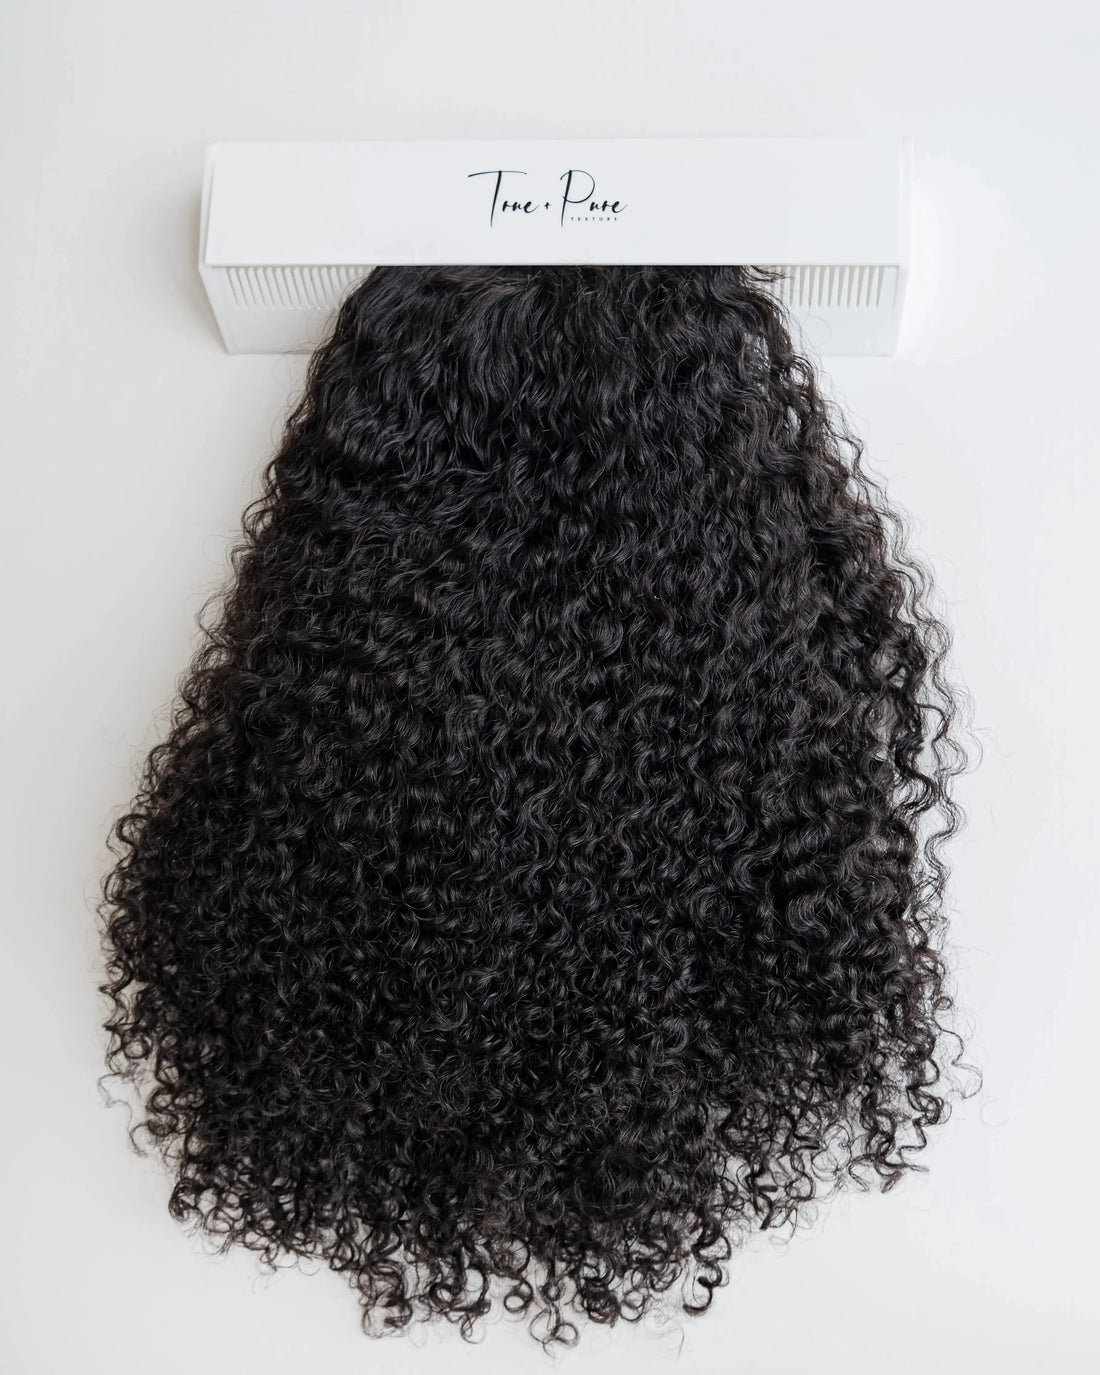 4-in-1 Hair Extension Style Caddy - True and Pure Texture